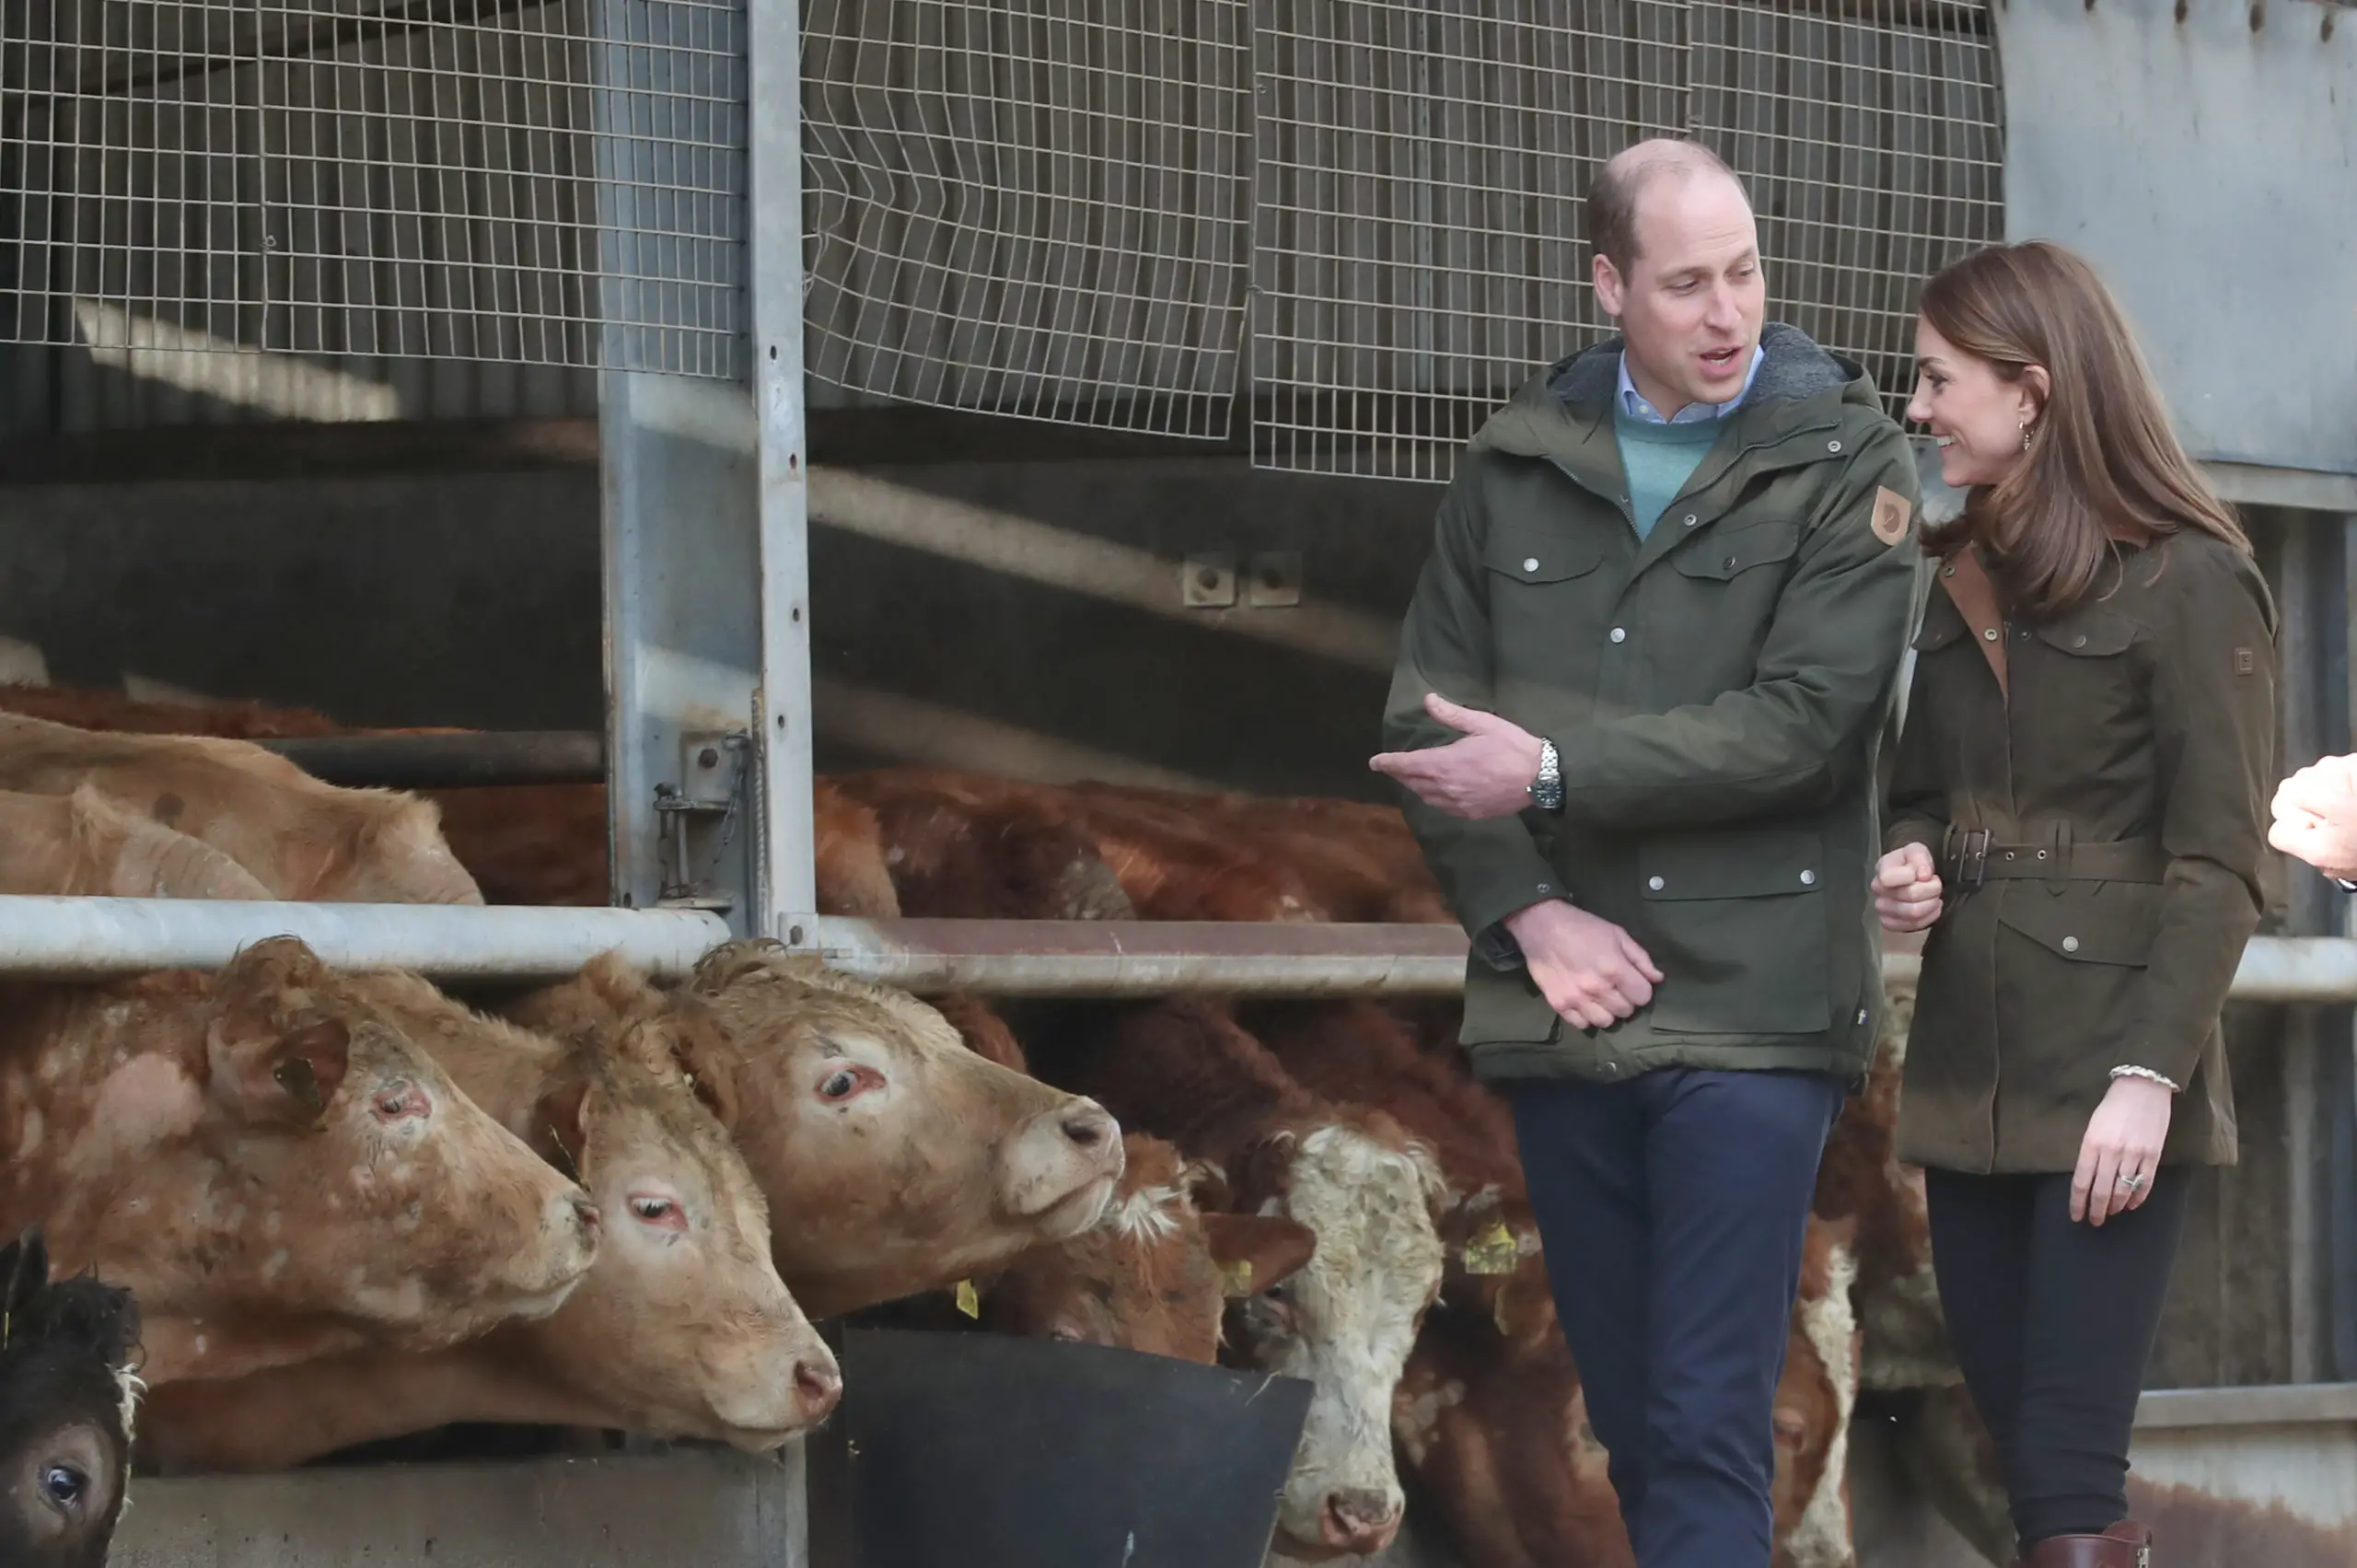 The Duke and Duchess of Cambridge during a visit to the Teagasc Animal & Grassland Research Centre at Grange, in County Meath, as part of their three day visit to the Republic of Ireland.